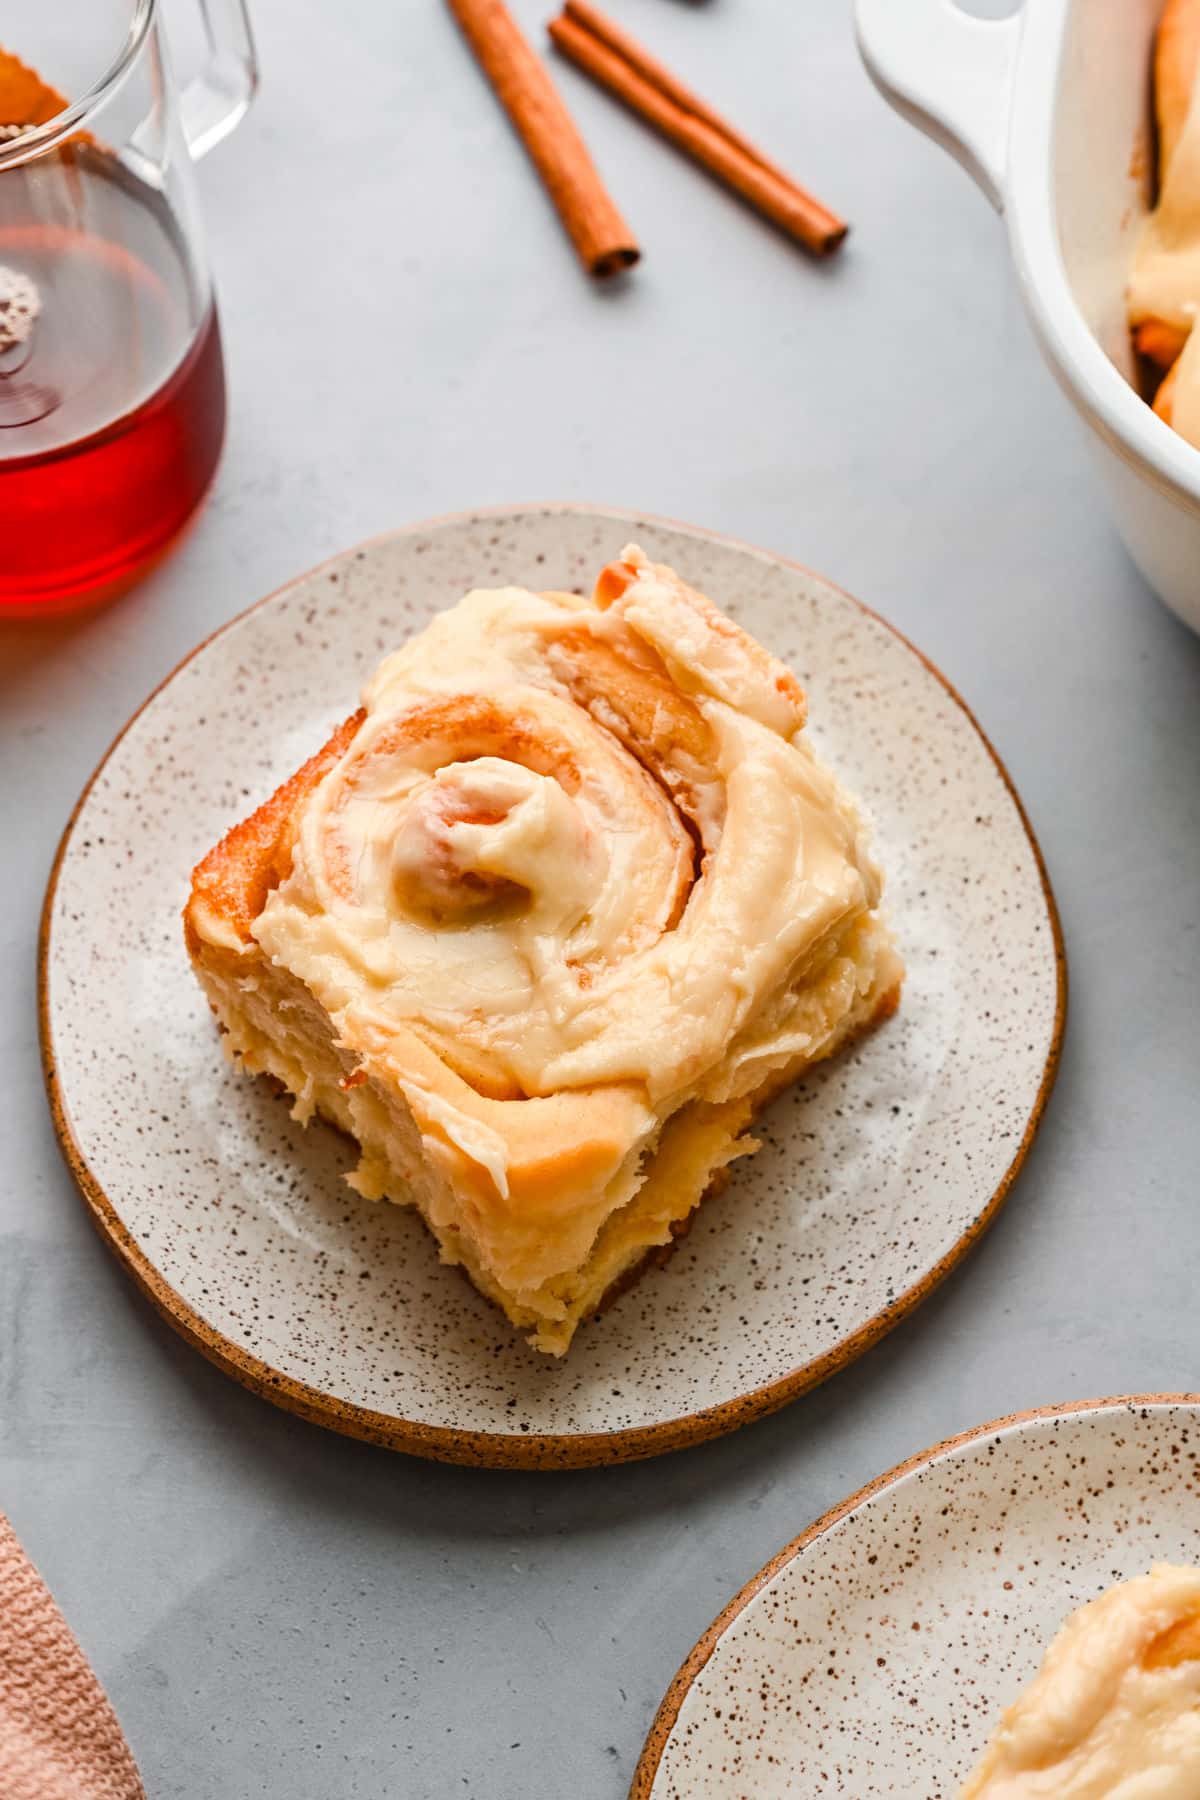 A maple cinnamon roll on a plate next to the dish of cinnamon rolls. 